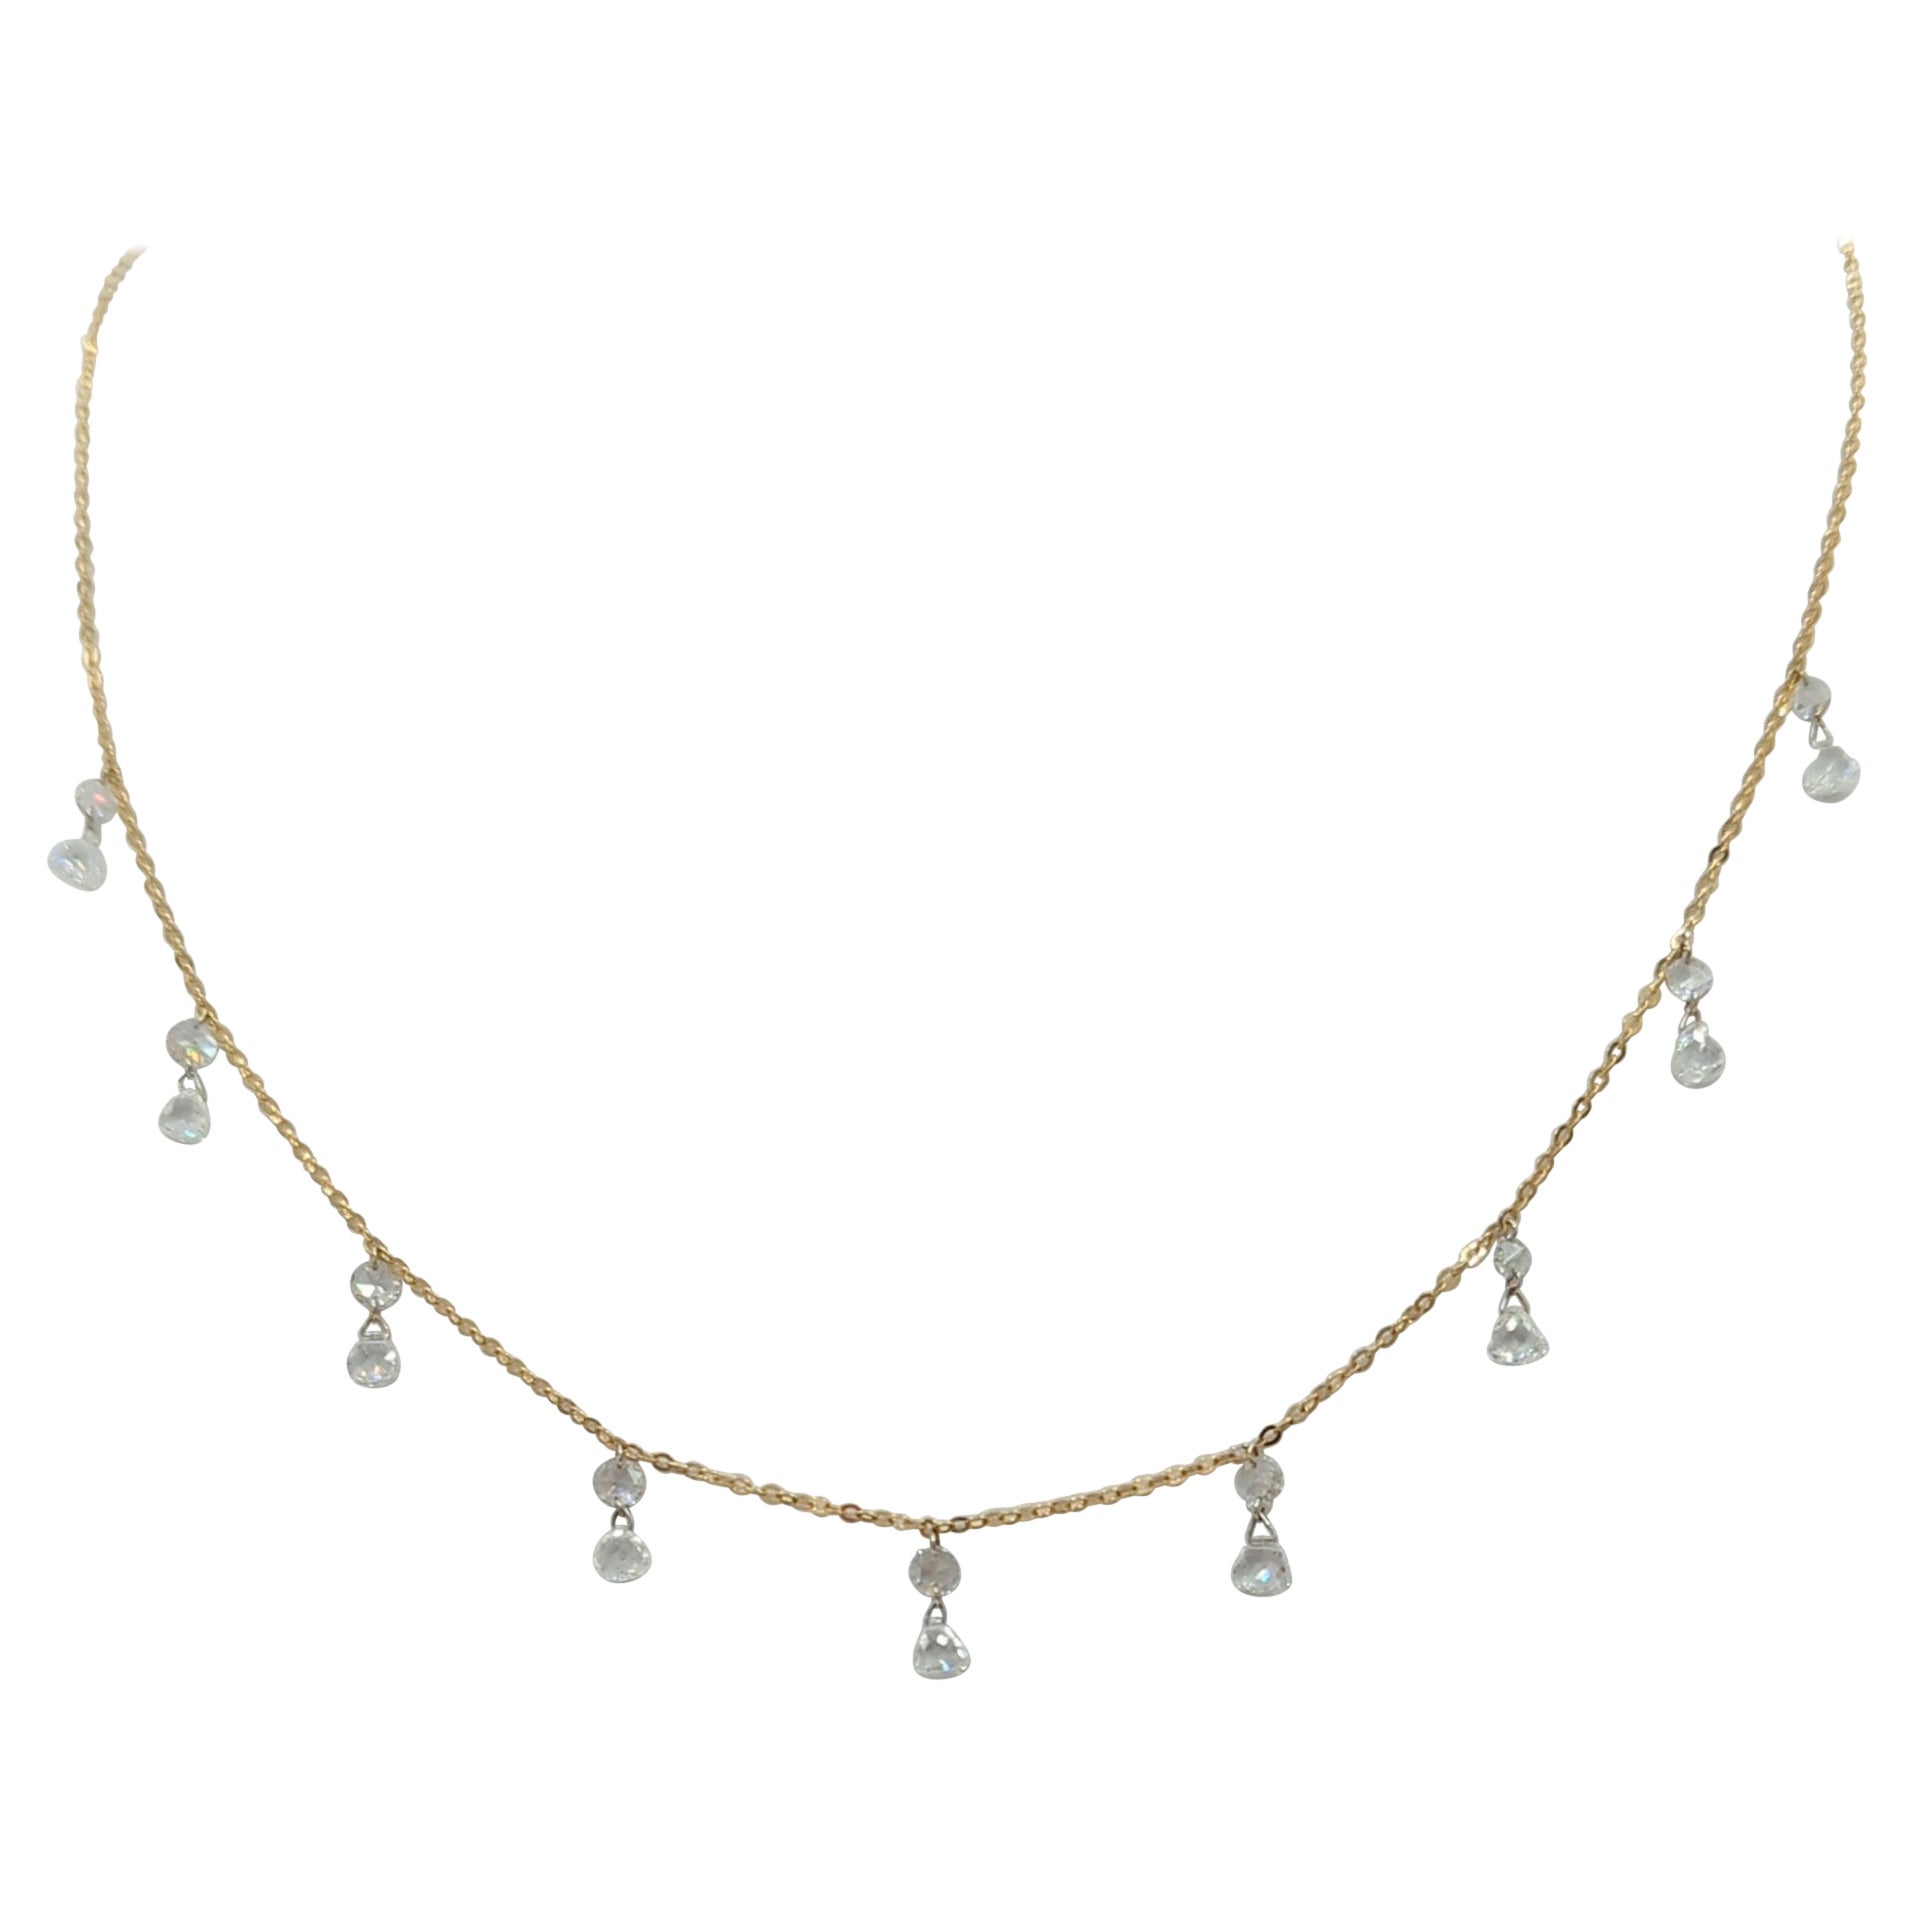 White Diamond Rose Cut Dangle Necklace in 18K Yellow Gold